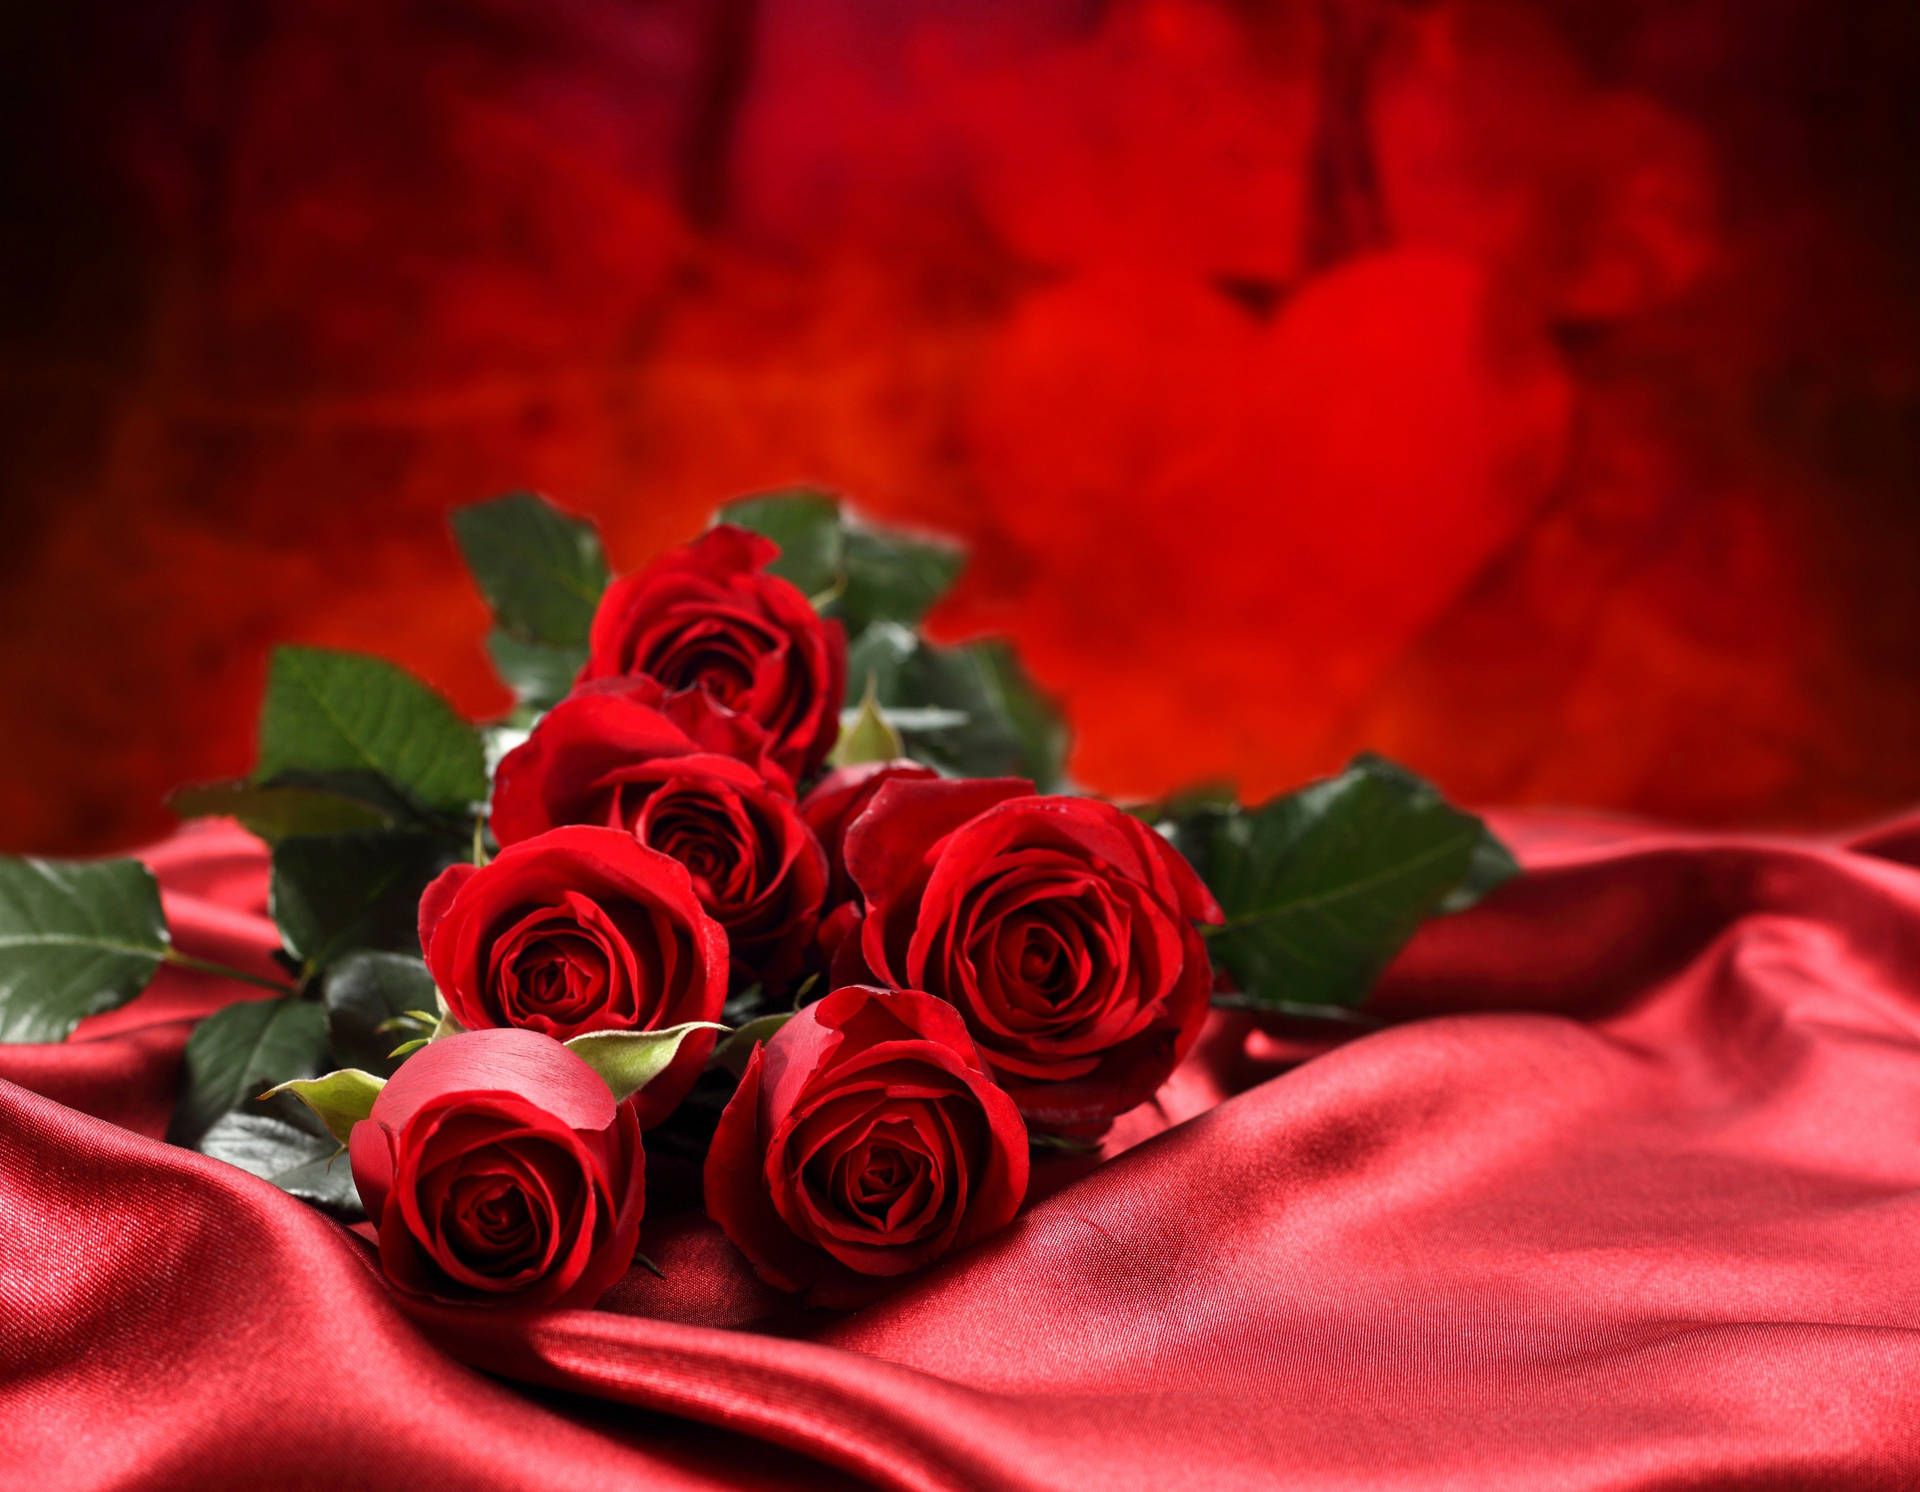 Free Red Rose Wallpaper Downloads, [100+] Red Rose Wallpapers for FREE |  